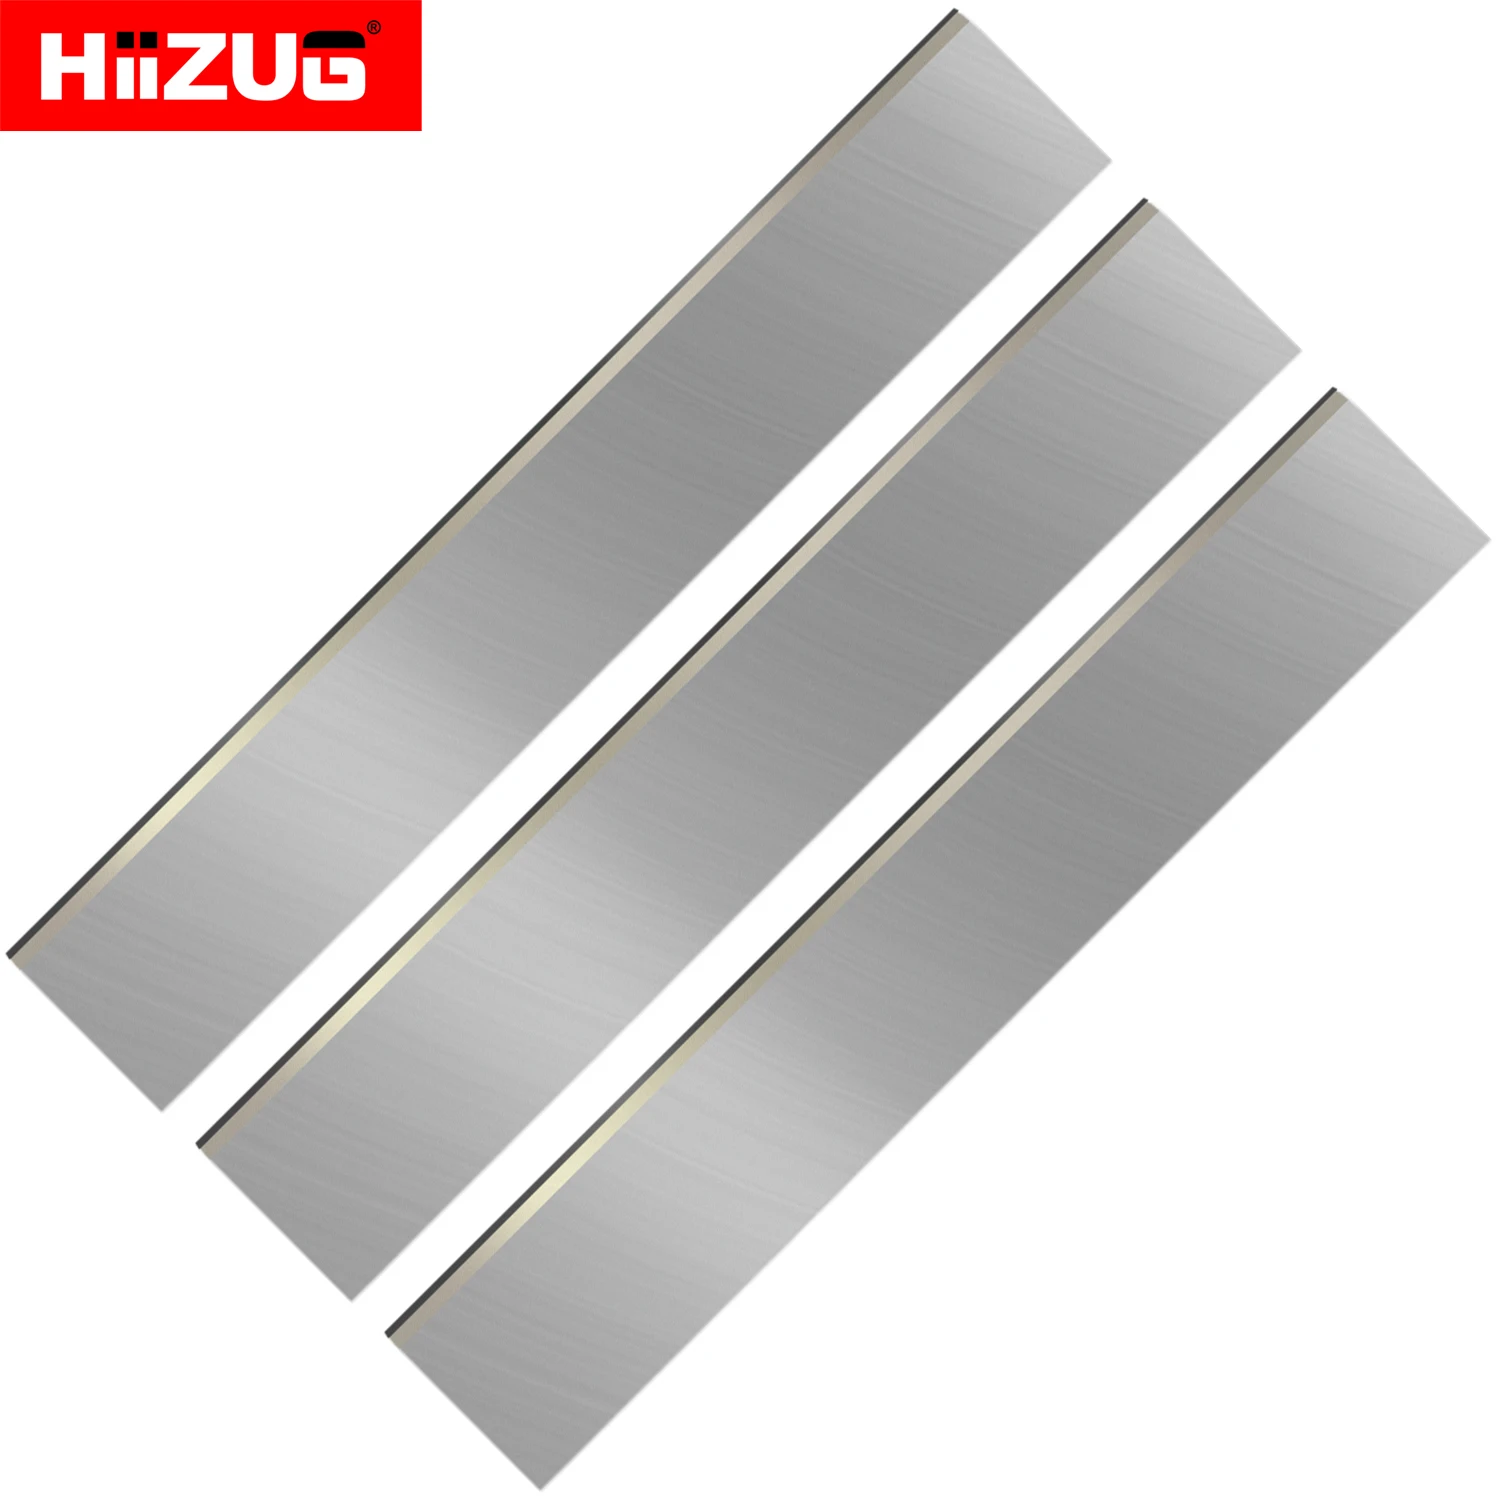 

210mm×35mm×3mm Planer Blades Knives for Electric Thickness Planer Jointer Machine HSS TCT Set of 3 Pieces